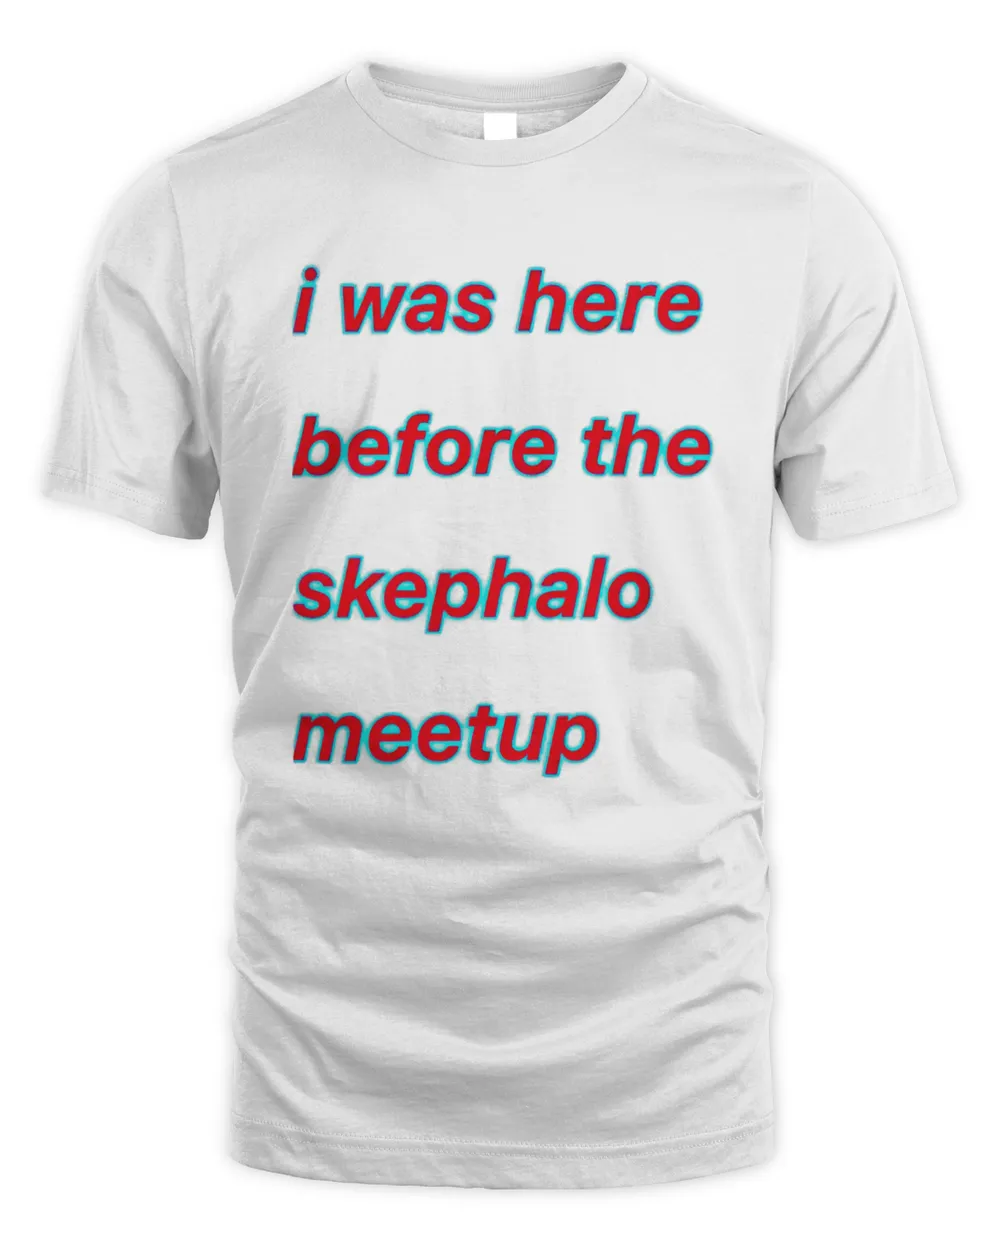 I was here before the skephalo meetup shirt